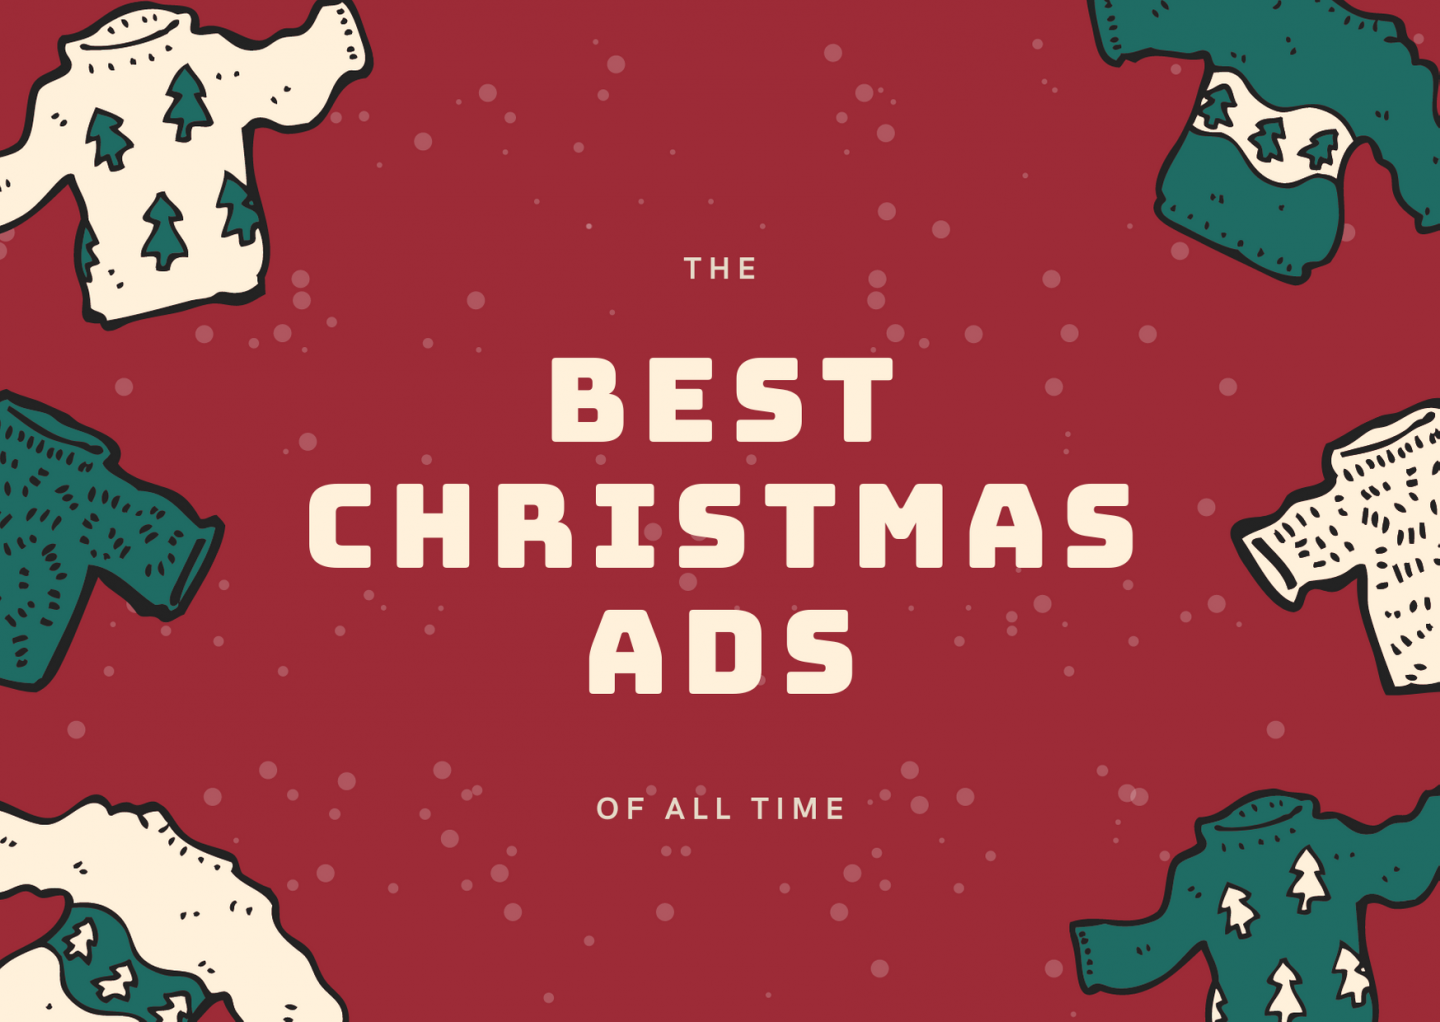 The best Christmas ads of all time Emily Jane Johnston